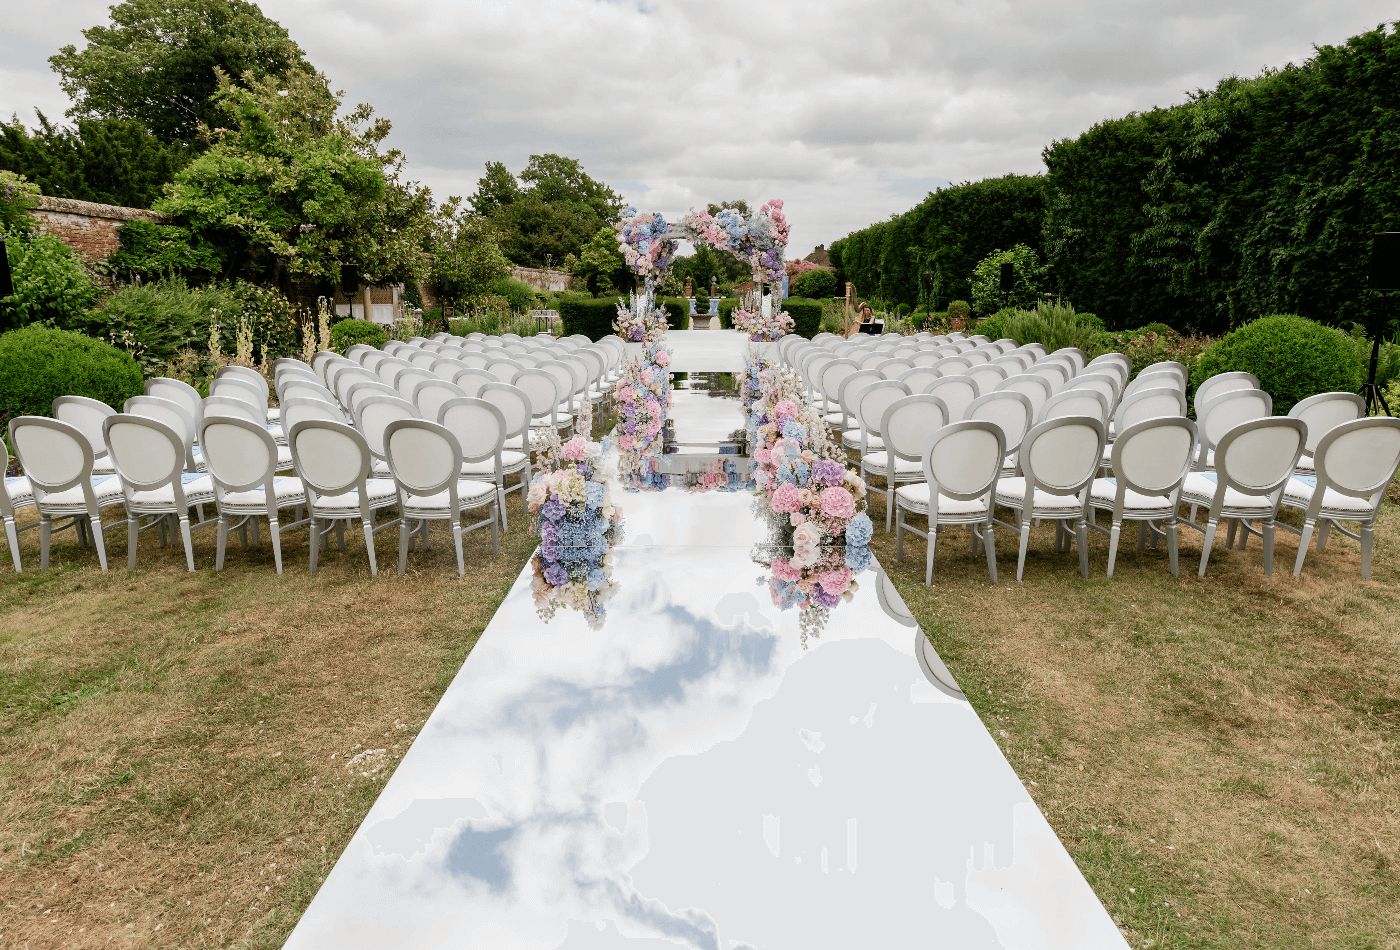 Outdoor wedding, ceremony set up on grass with white chairs and blue and pink floral arrangements.jpg